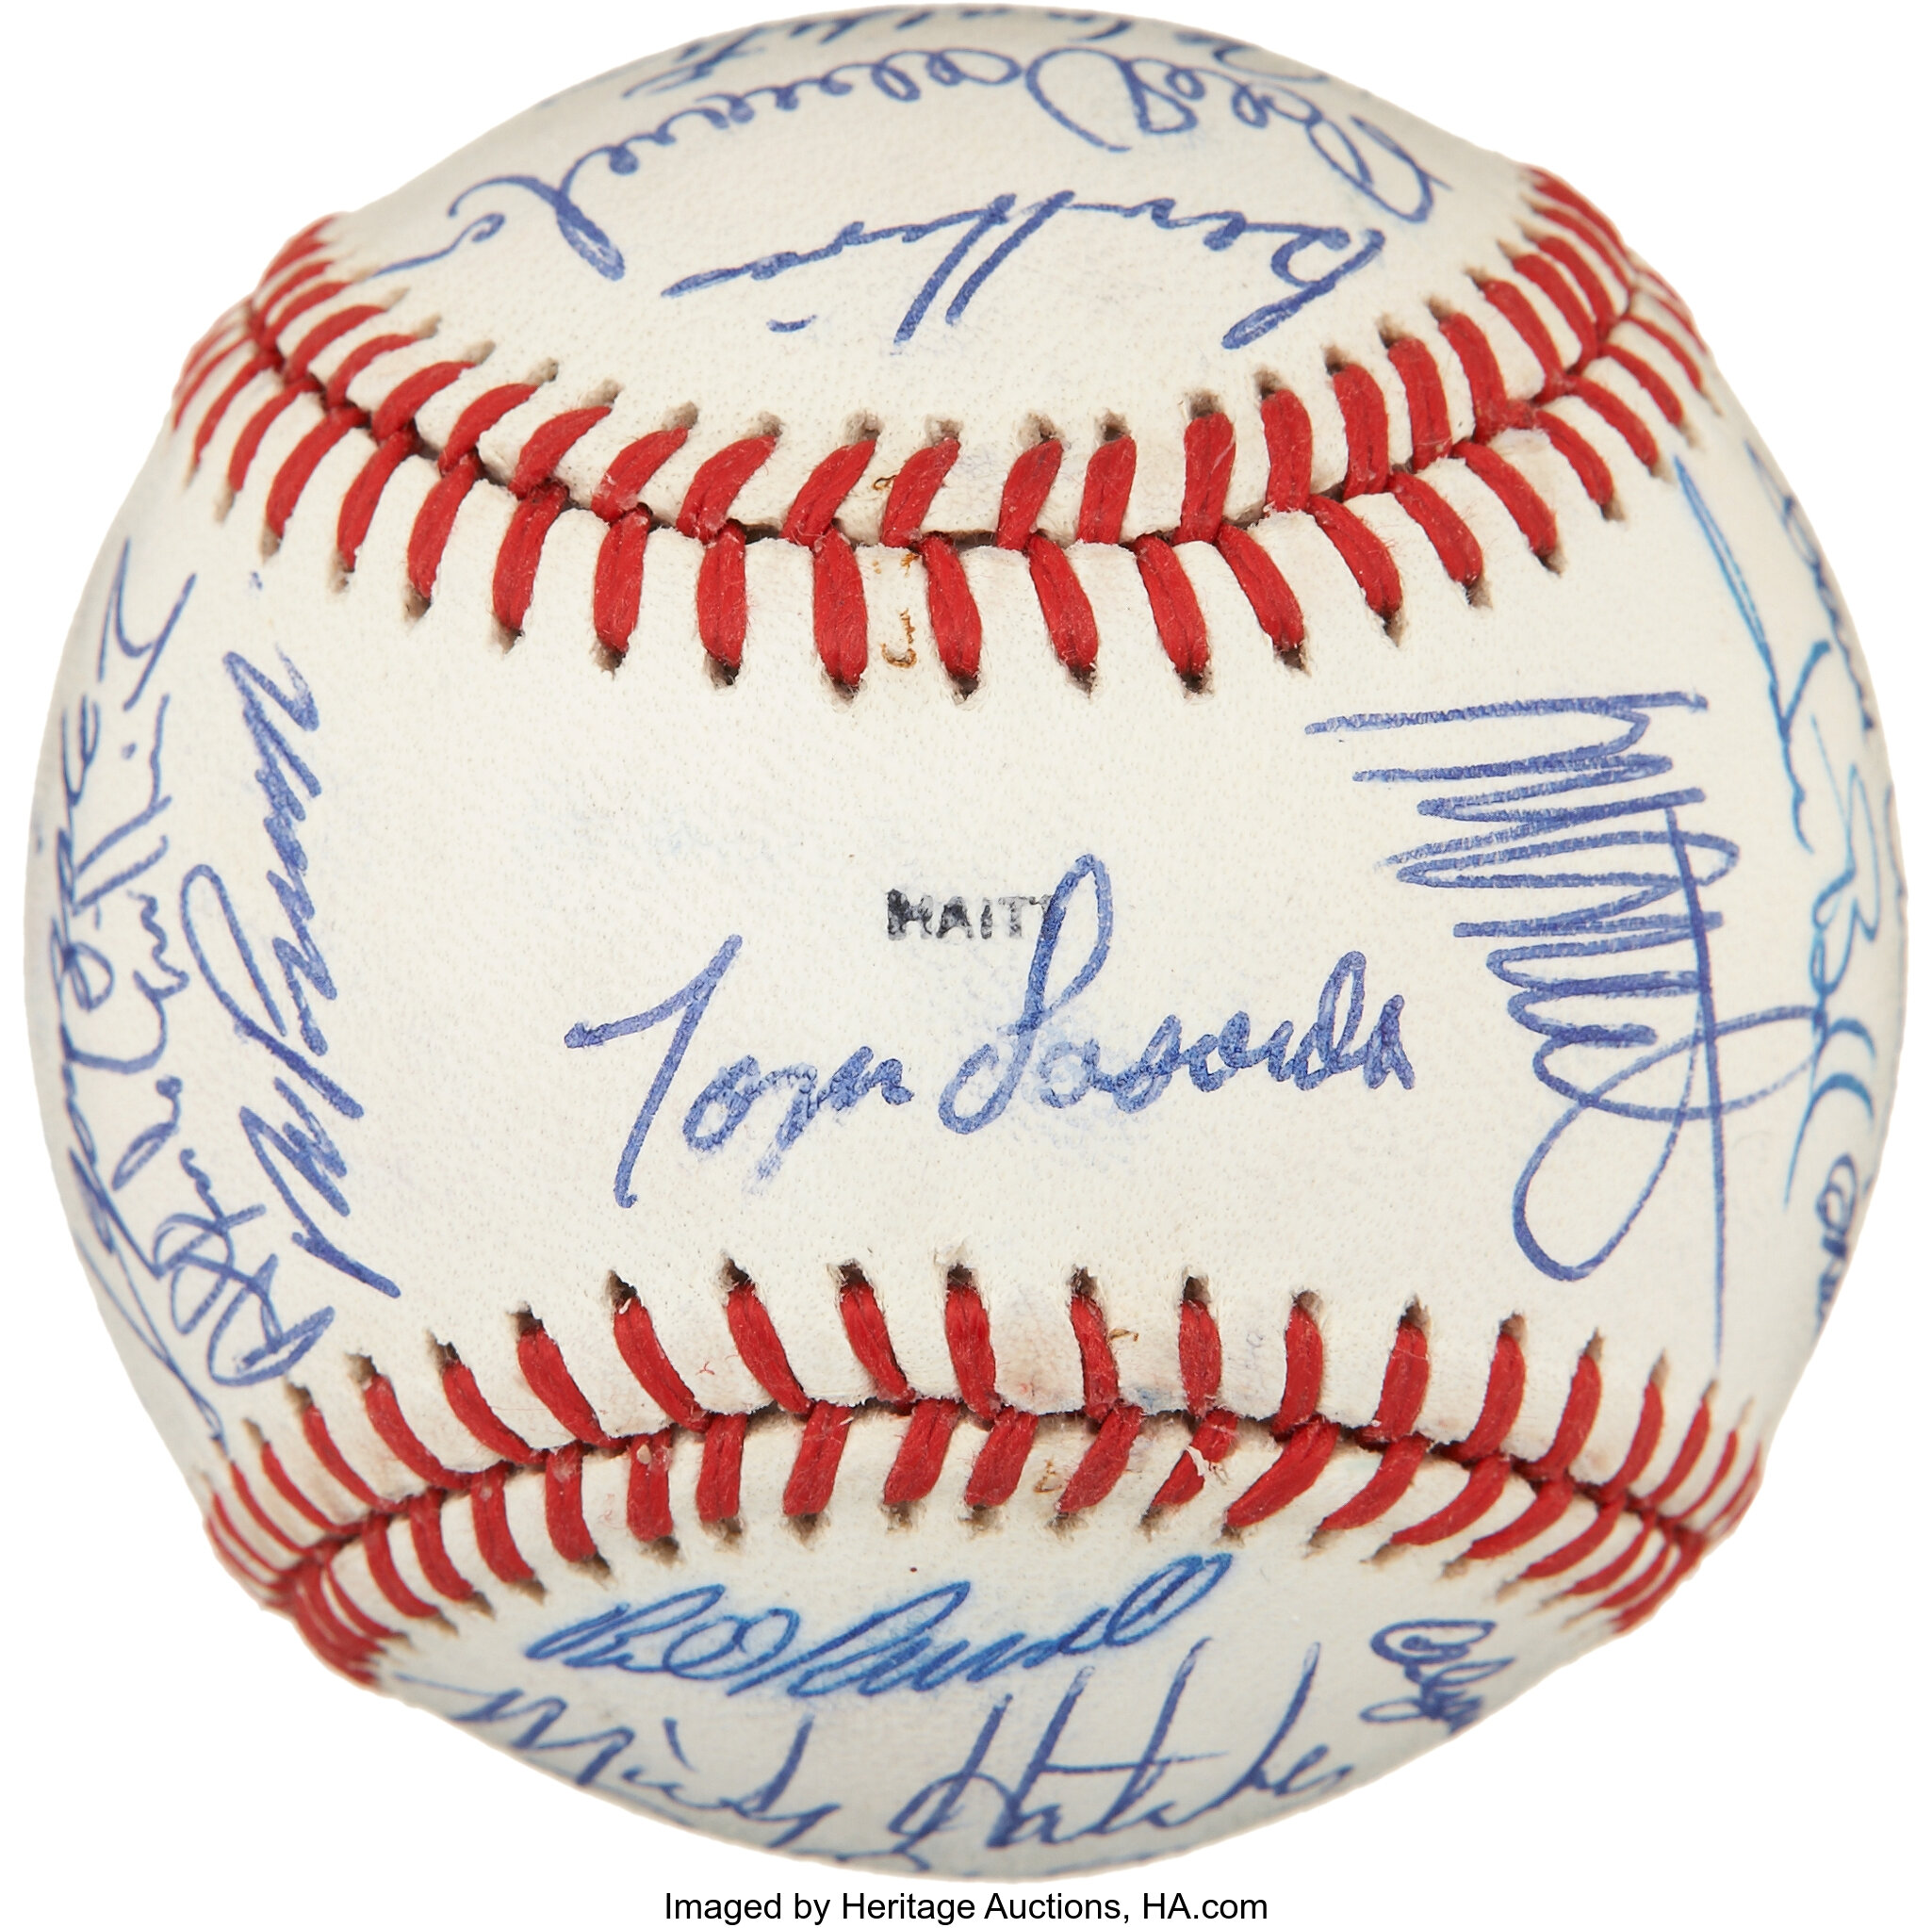 Los Angeles Dodgers Foundation - Bid on game-used and autographed